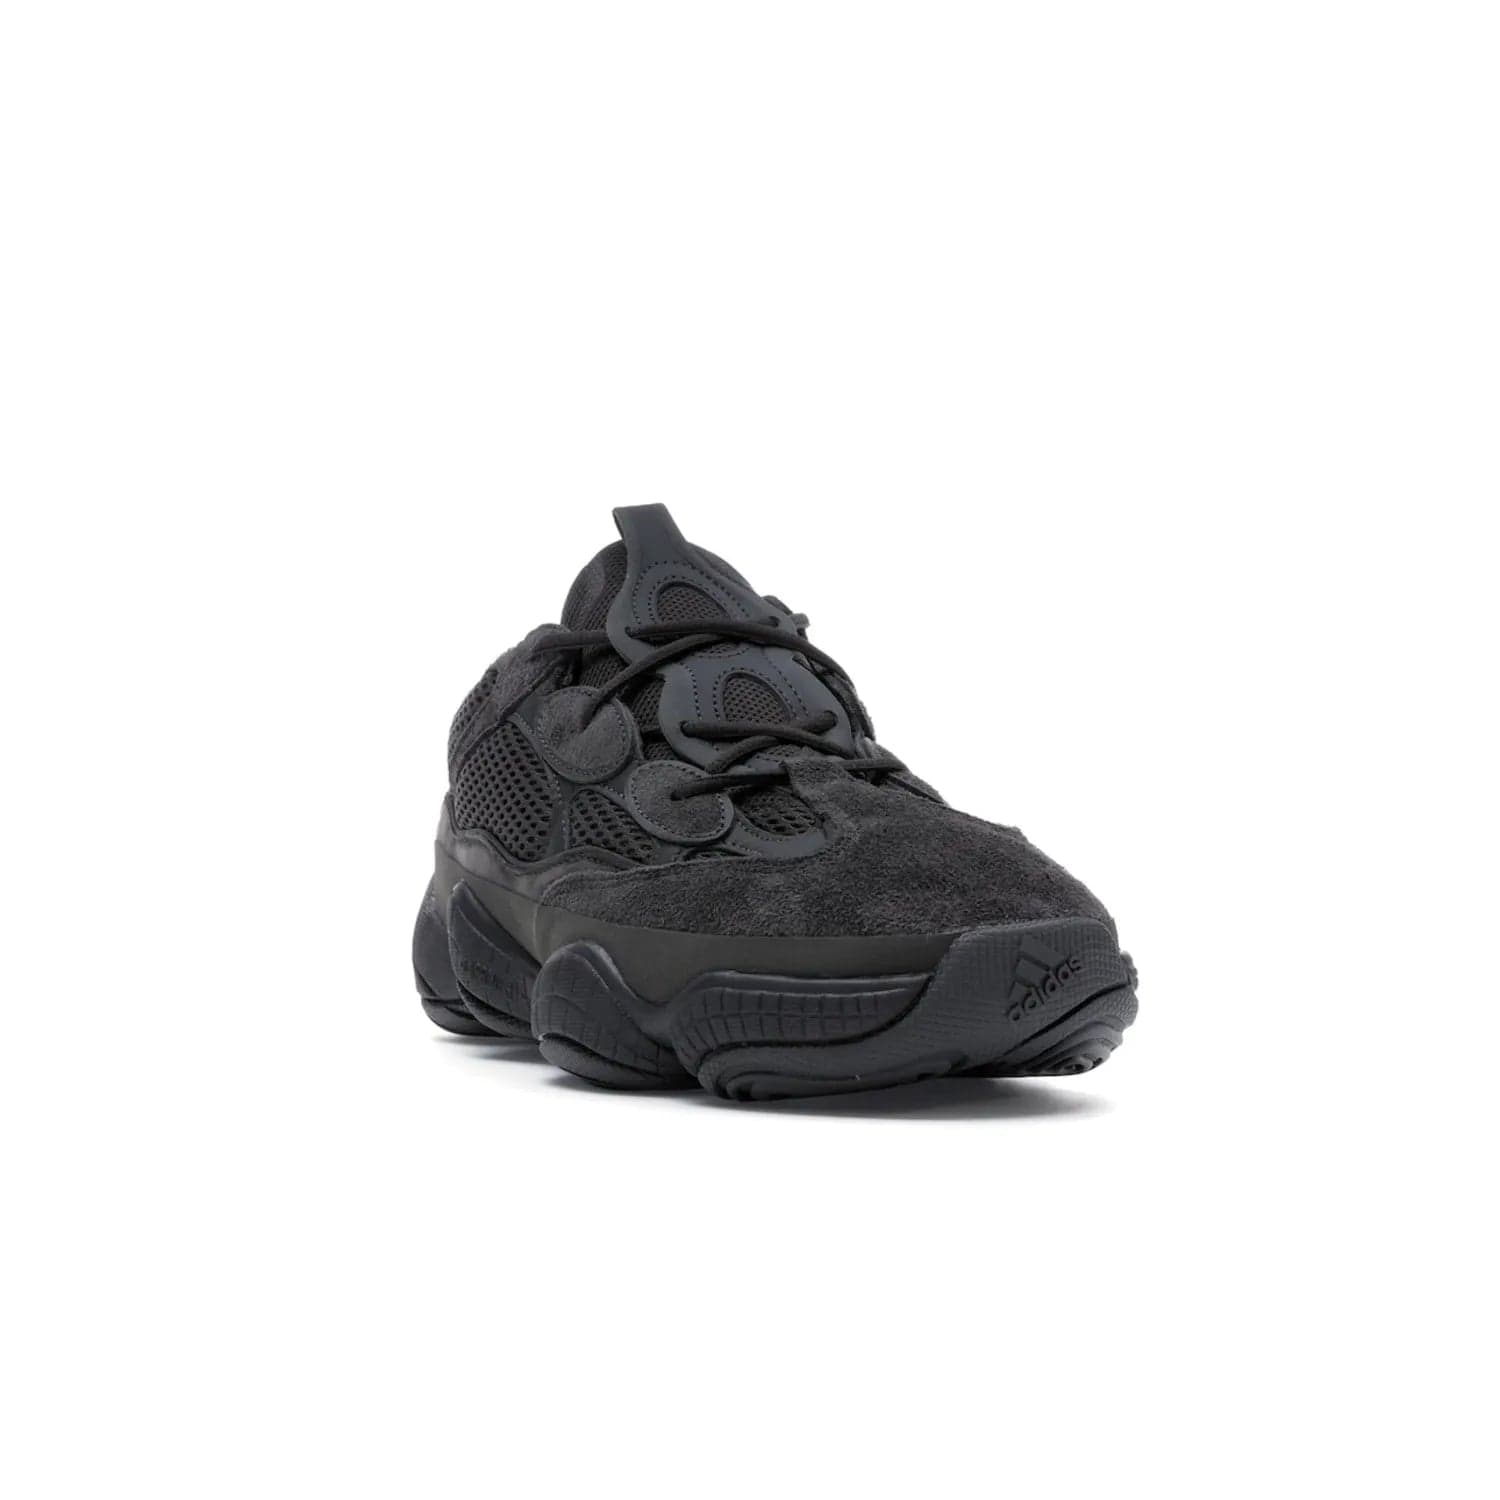 adidas Yeezy 500 Utility Black - Image 8 - Only at www.BallersClubKickz.com - Iconic adidas Yeezy 500 Utility Black in All-Black colorway. Durable black mesh and suede upper with adiPRENE® sole delivers comfort and support. Be unstoppable with the Yeezy 500 Utility Black. Released July 2018.